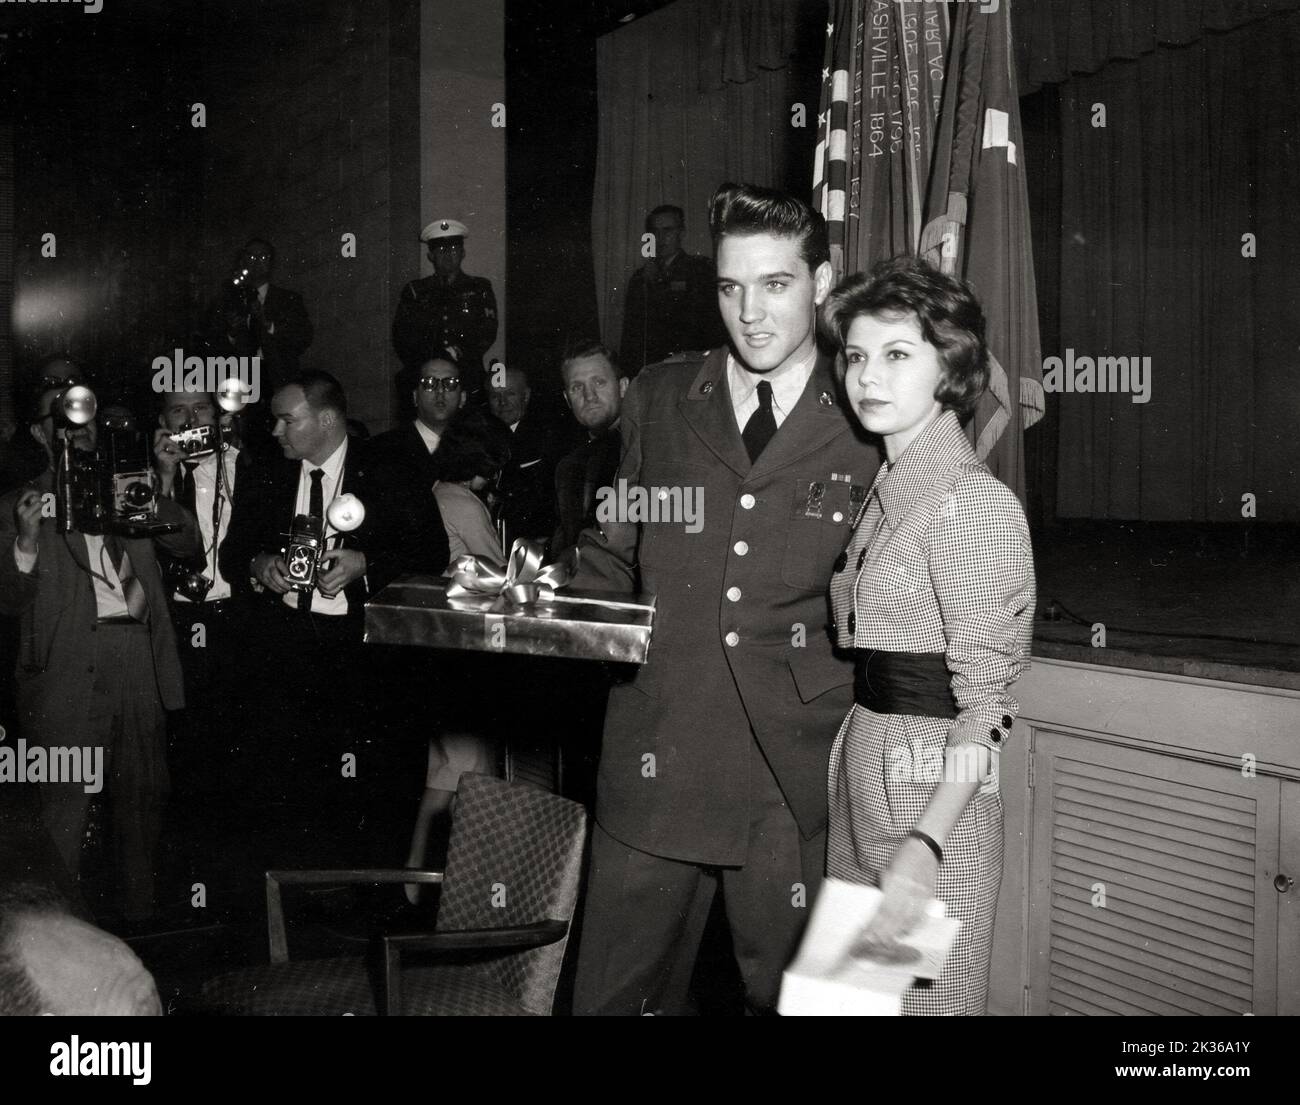 Sergeant Elvis Presley, Rock & Roll Singer, Receives a Gift From Miss Nancy Sinatra, Daughter of Frank Sinatra, at a Press Conference Held by Sergeant Presley in Service Club Stock Photo